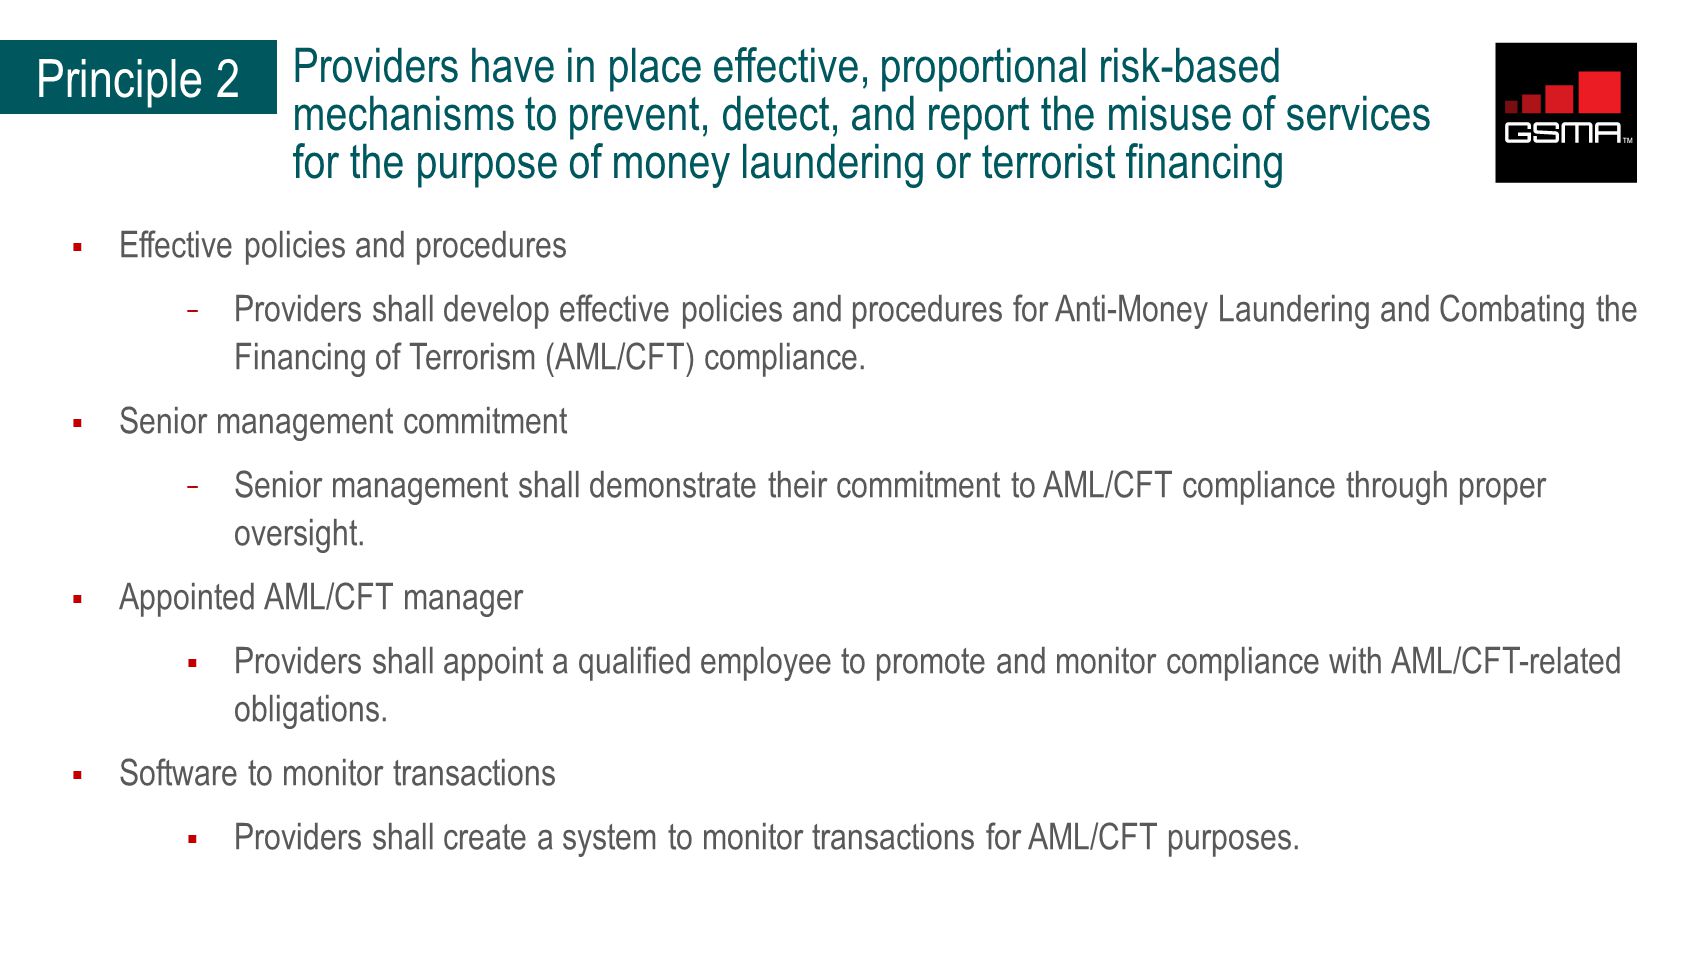 Principle 2  Effective policies and procedures − Providers shall develop effective policies and procedures for Anti-Money Laundering and Combating the Financing of Terrorism (AML/CFT) compliance.